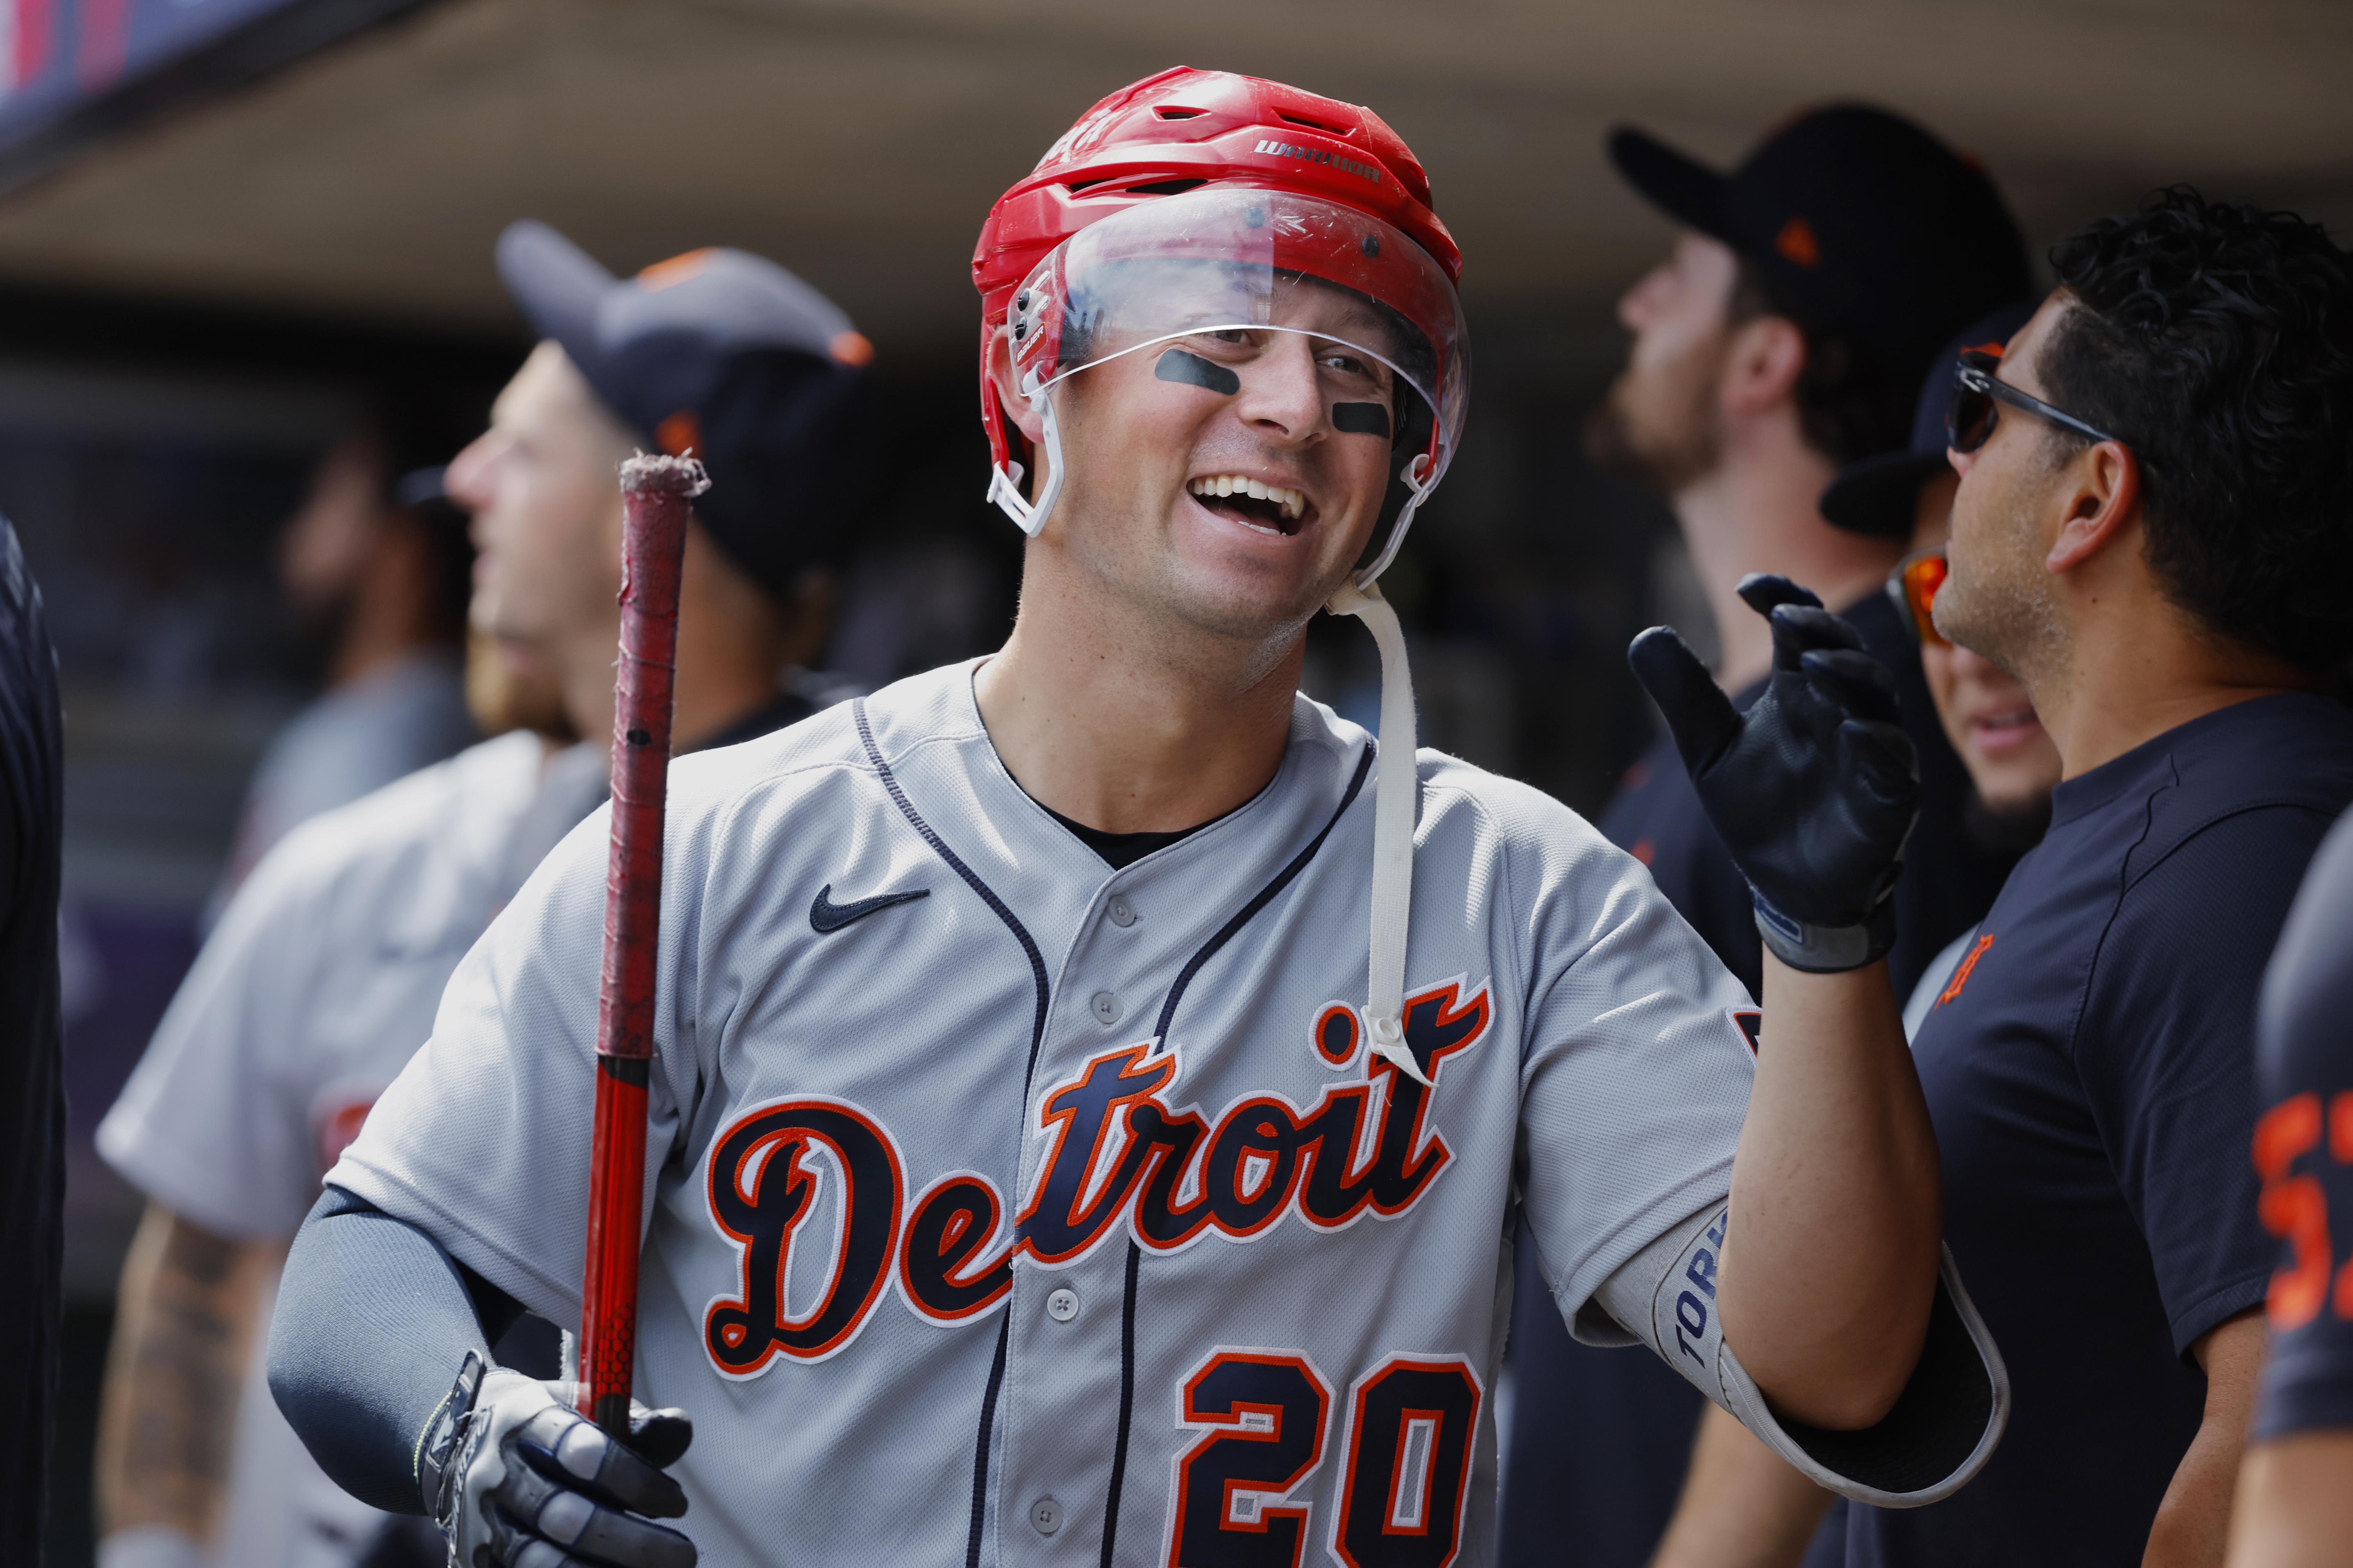 Greatest Uniforms in Sports, No. 20: Detroit Tigers